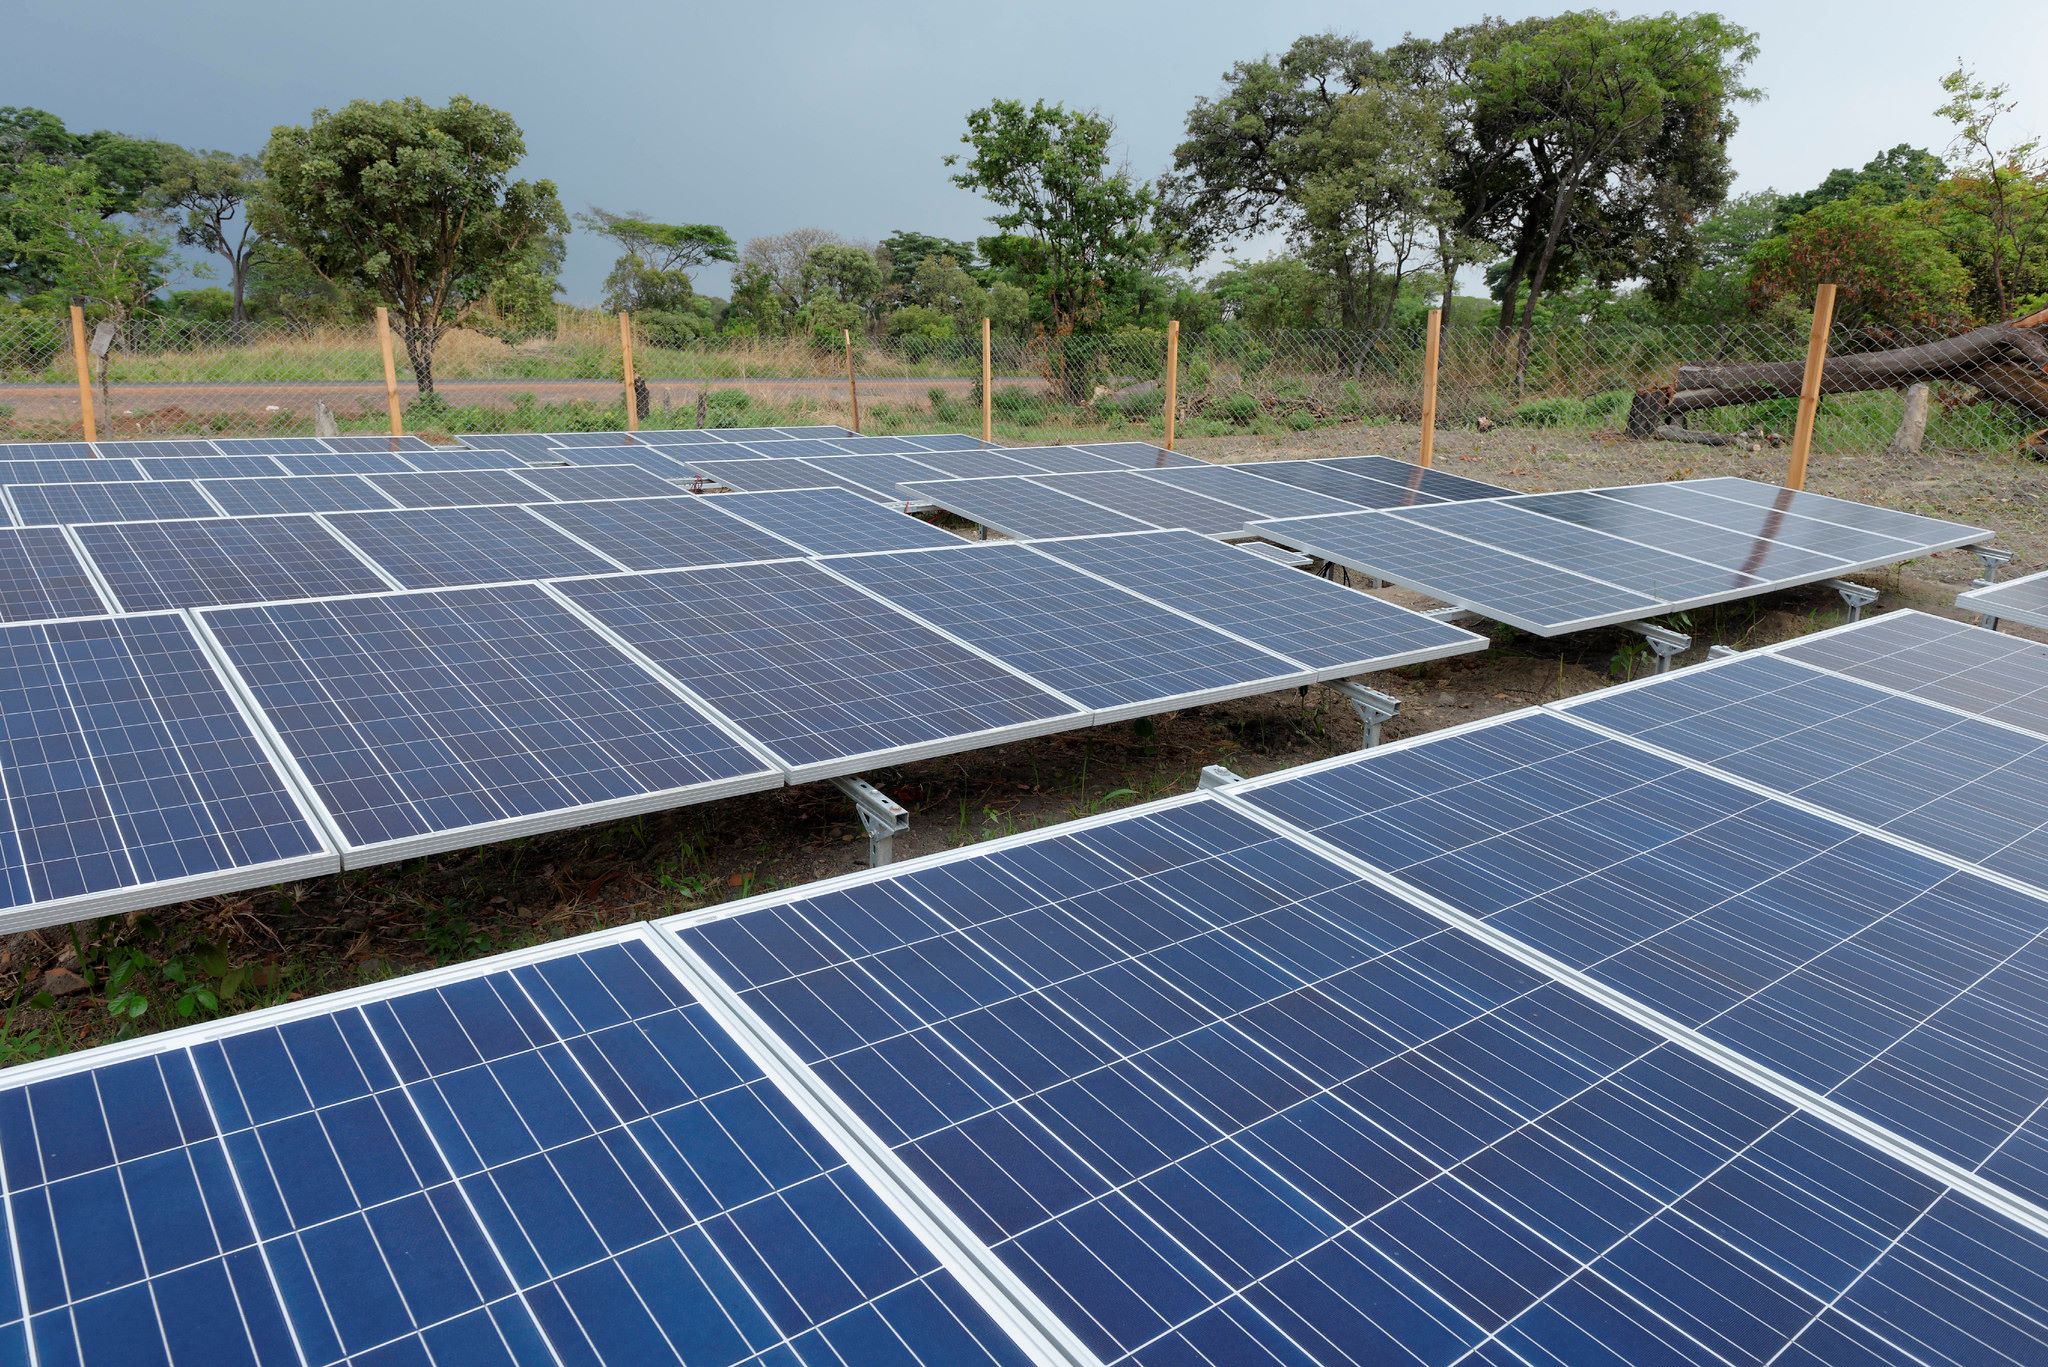 Solar panels in a field surrounded by wooden picket fences in Zambia